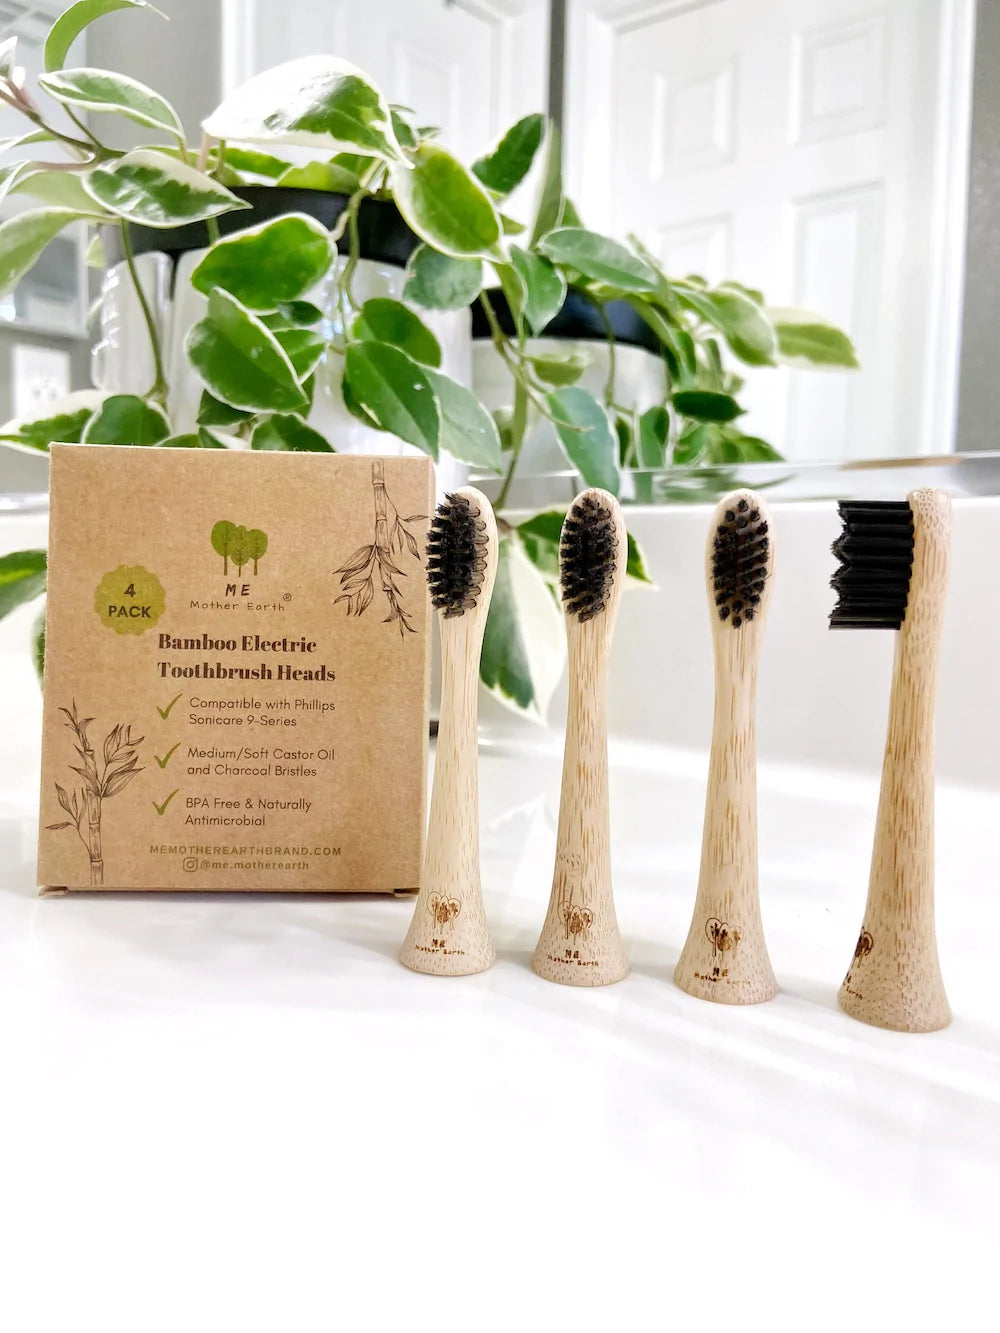 Bamboo Electric Toothbrush Heads- Sonicare Compatible - 4pk